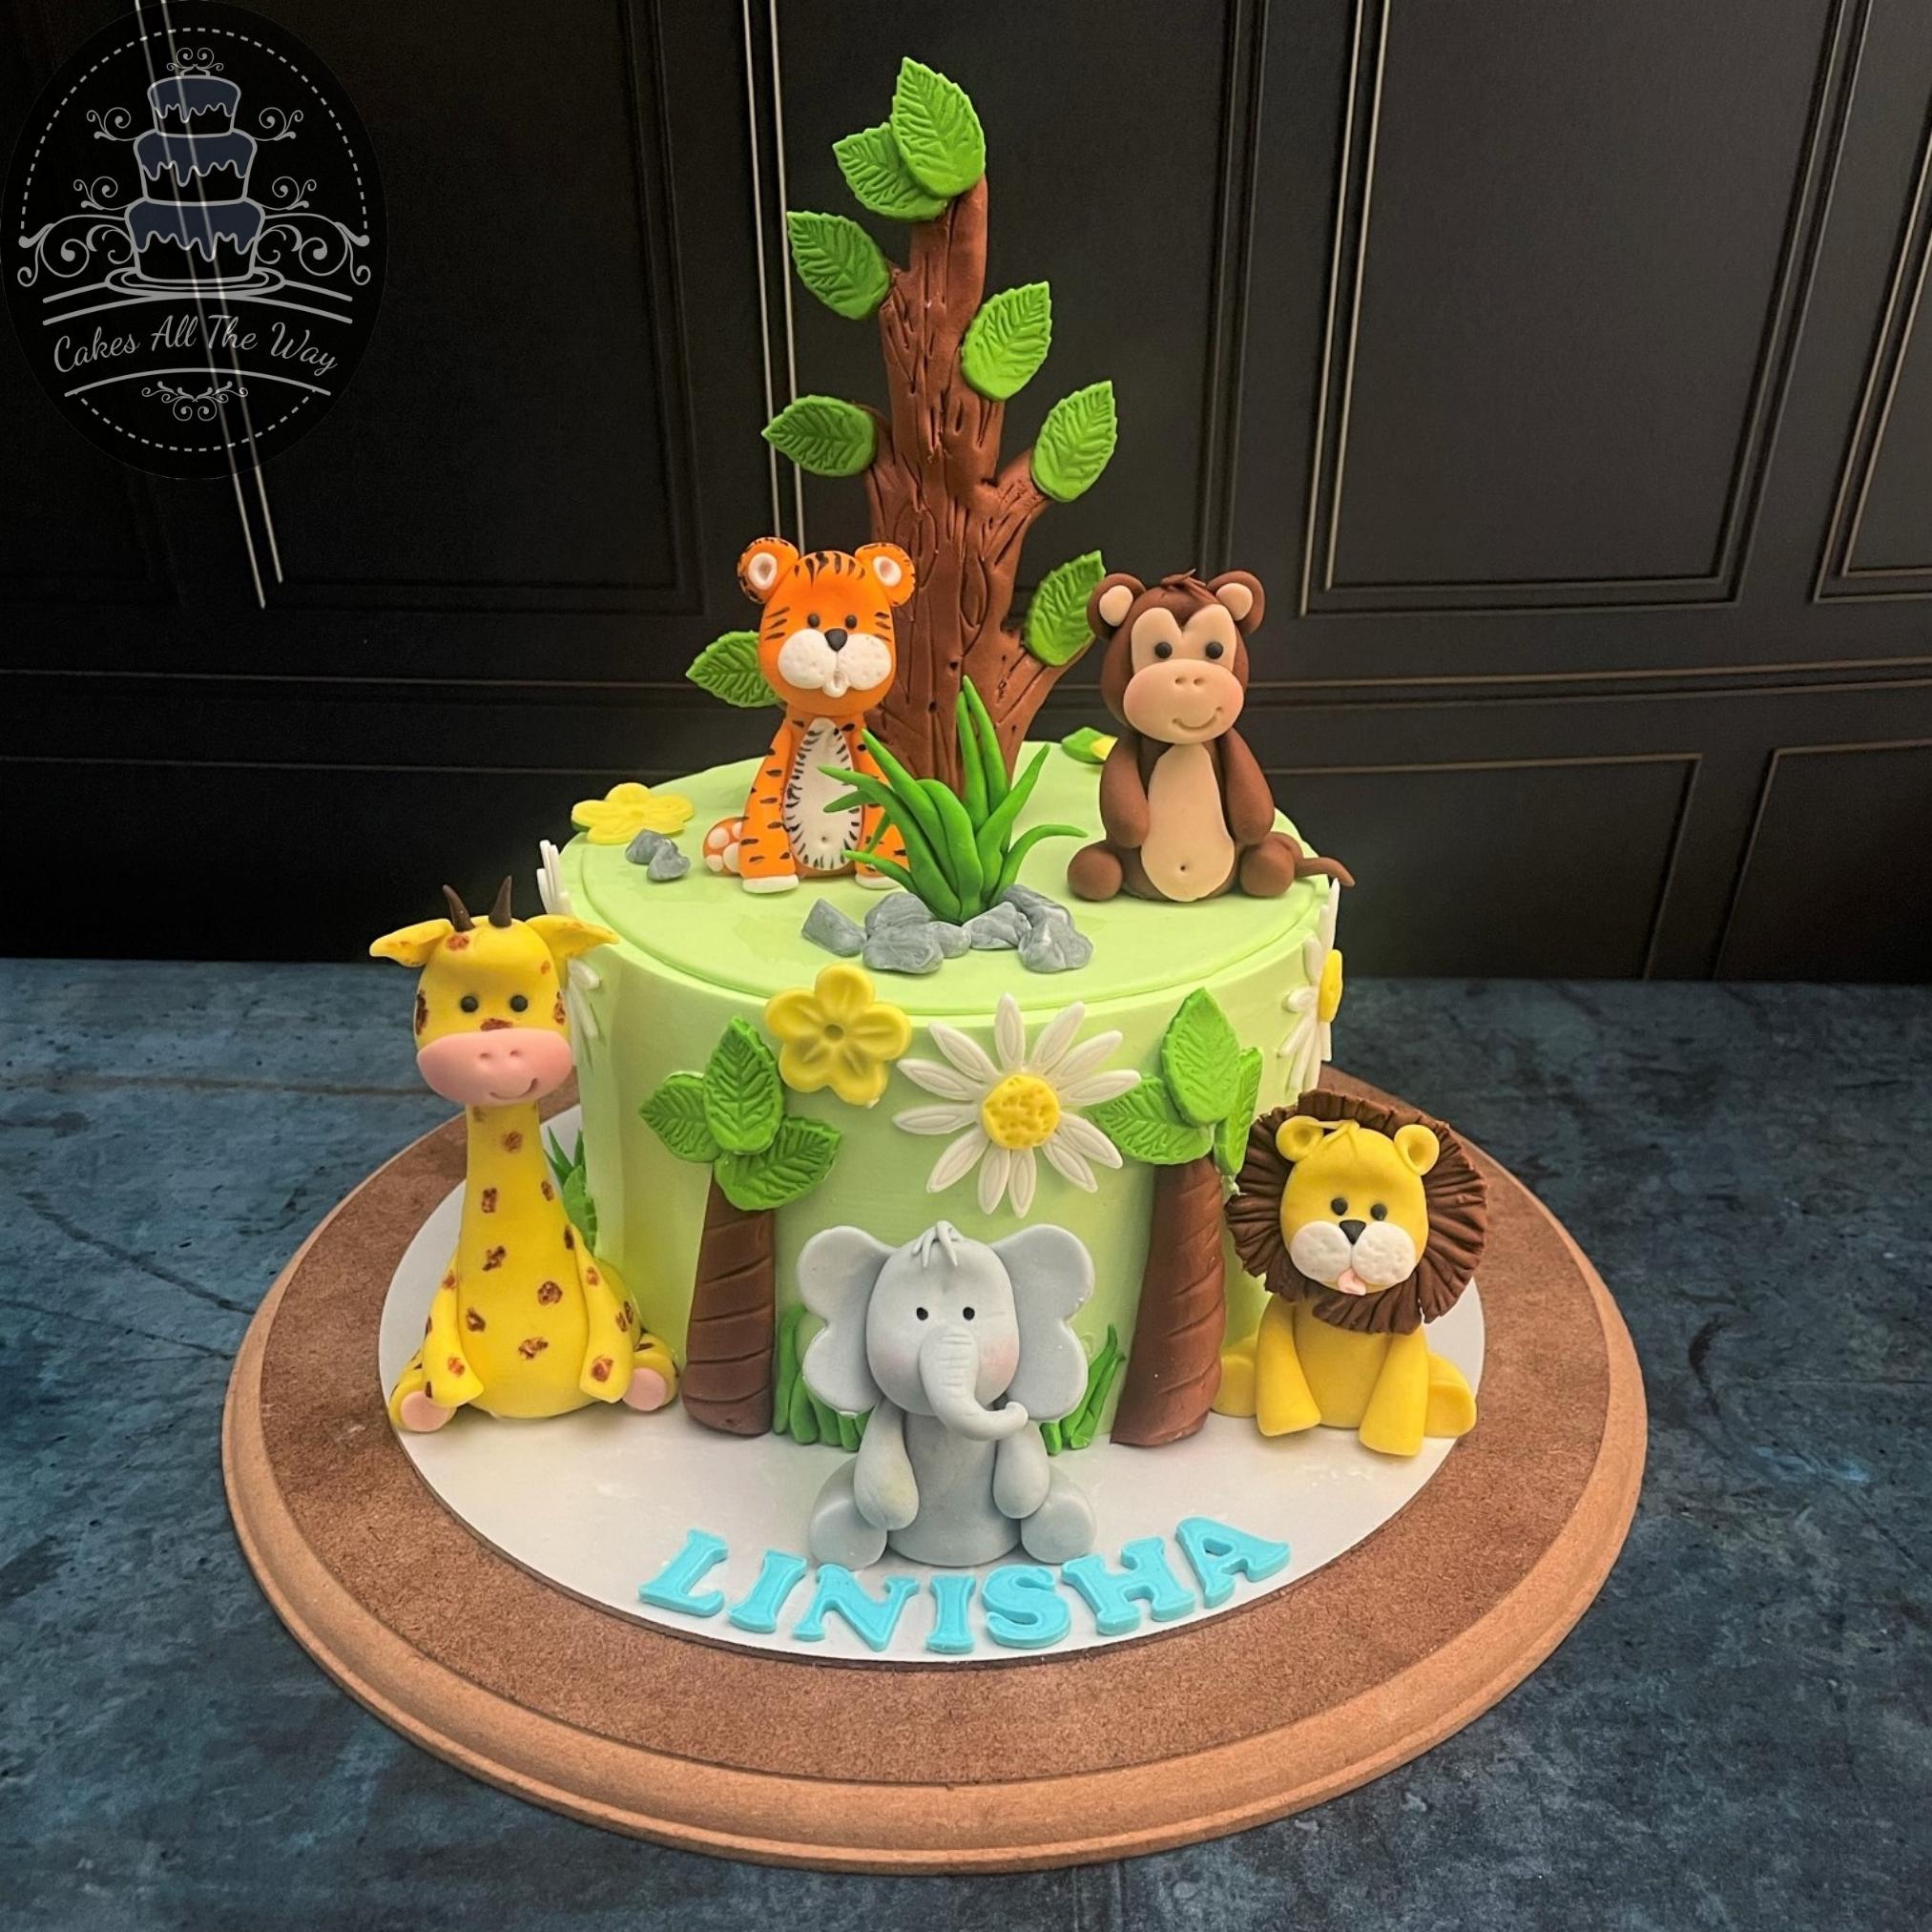 I made this safari themed cake at work today! I hate fondant but I'm happy  with how the lil lion turned out he's so cute 🥰 : r/cakedecorating